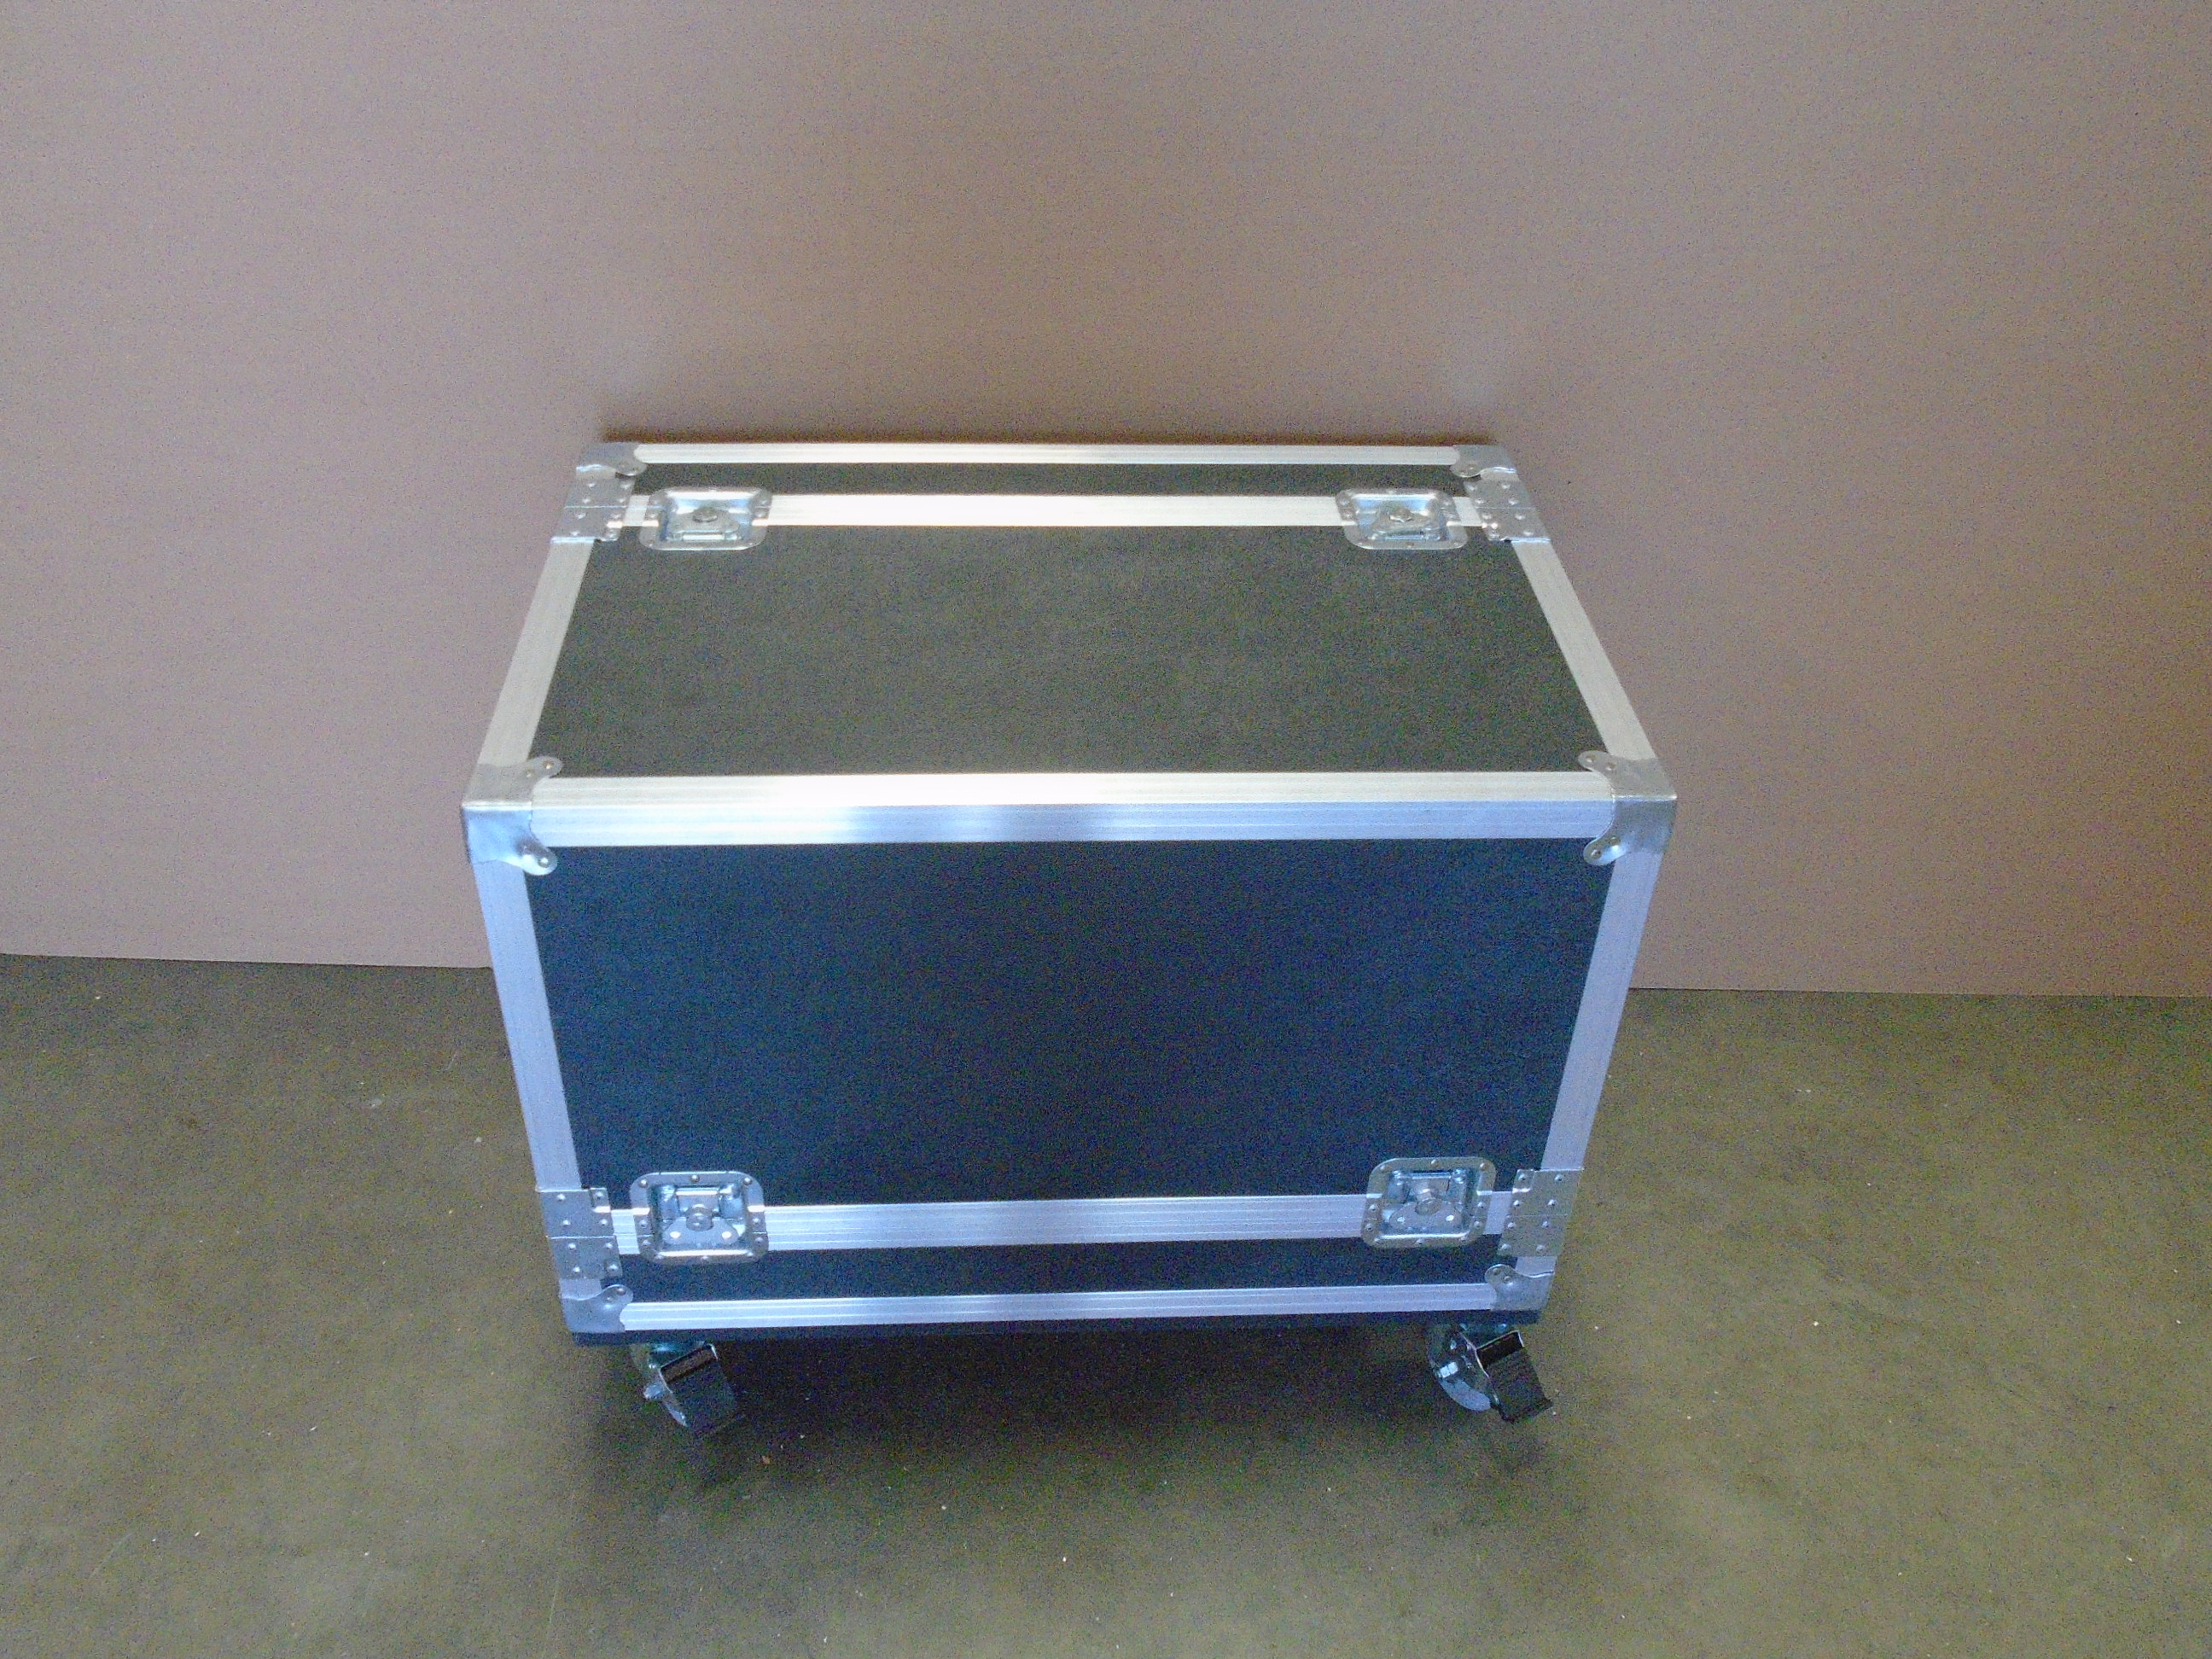 Print # 7329 - Custom Confidence Monitor Road Case for Element ELEFW328B 32" Monitor Kit By Nelson Case Corp